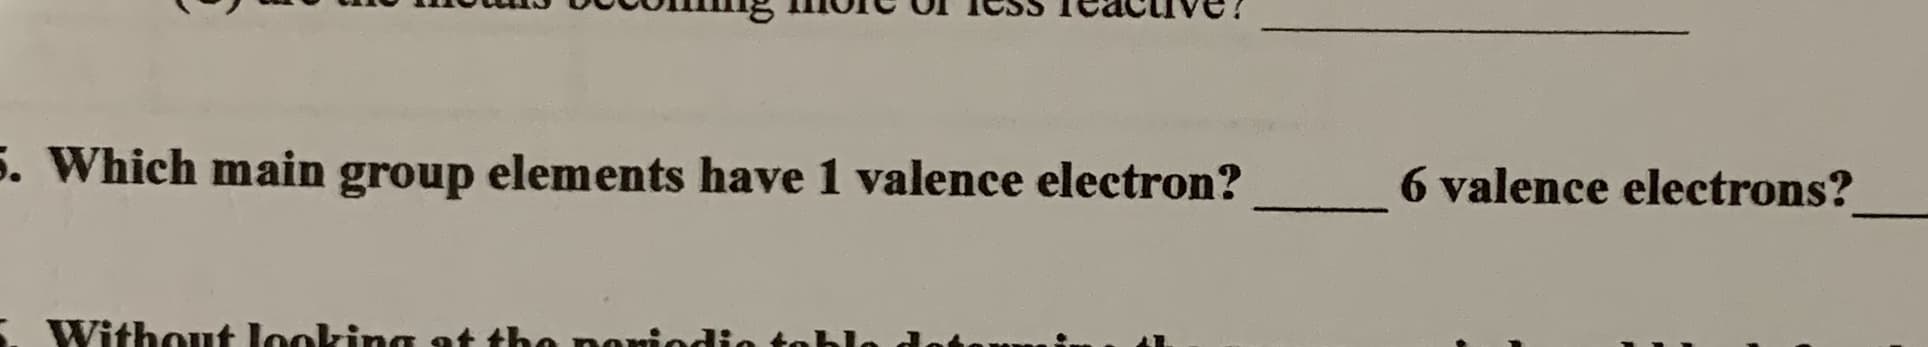 ess
Ieactive!
. Which main group elements have 1 valence electron?
6 valence electrons?
Without looking ot the nomic
